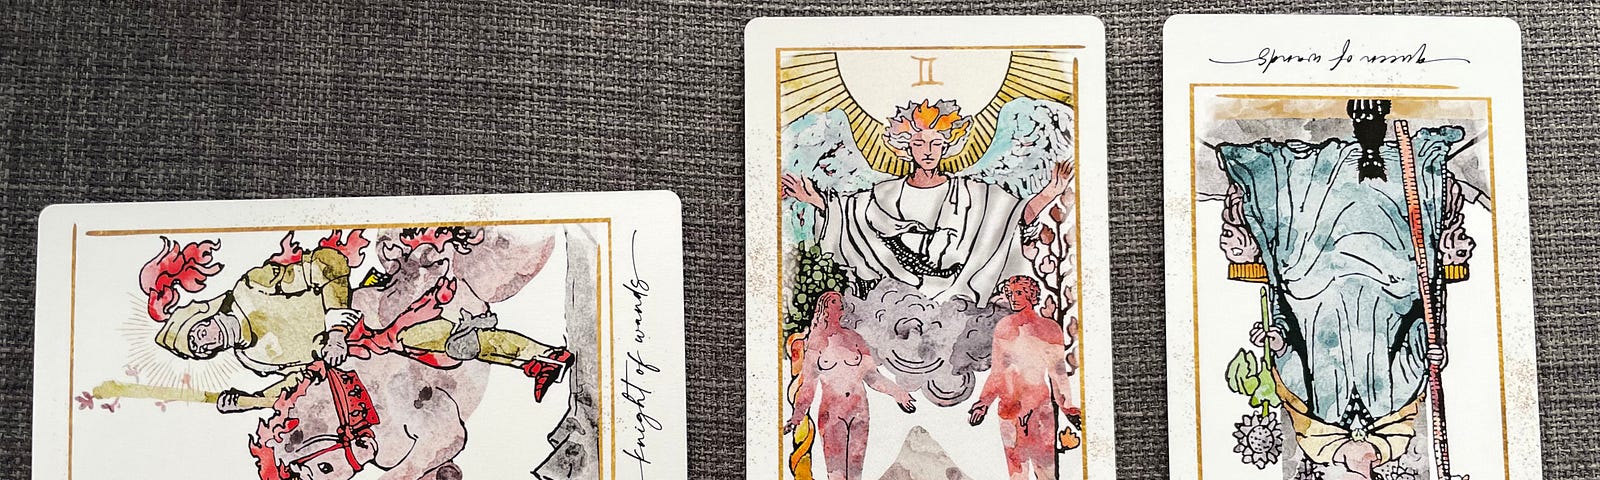 3 Tarot cards laid out from left to right: Knight of Wands (sideways), Lovers, Queen of Wands (reversed). The illustrations are based on traditional Tarot card design, but recreated in watercolor.